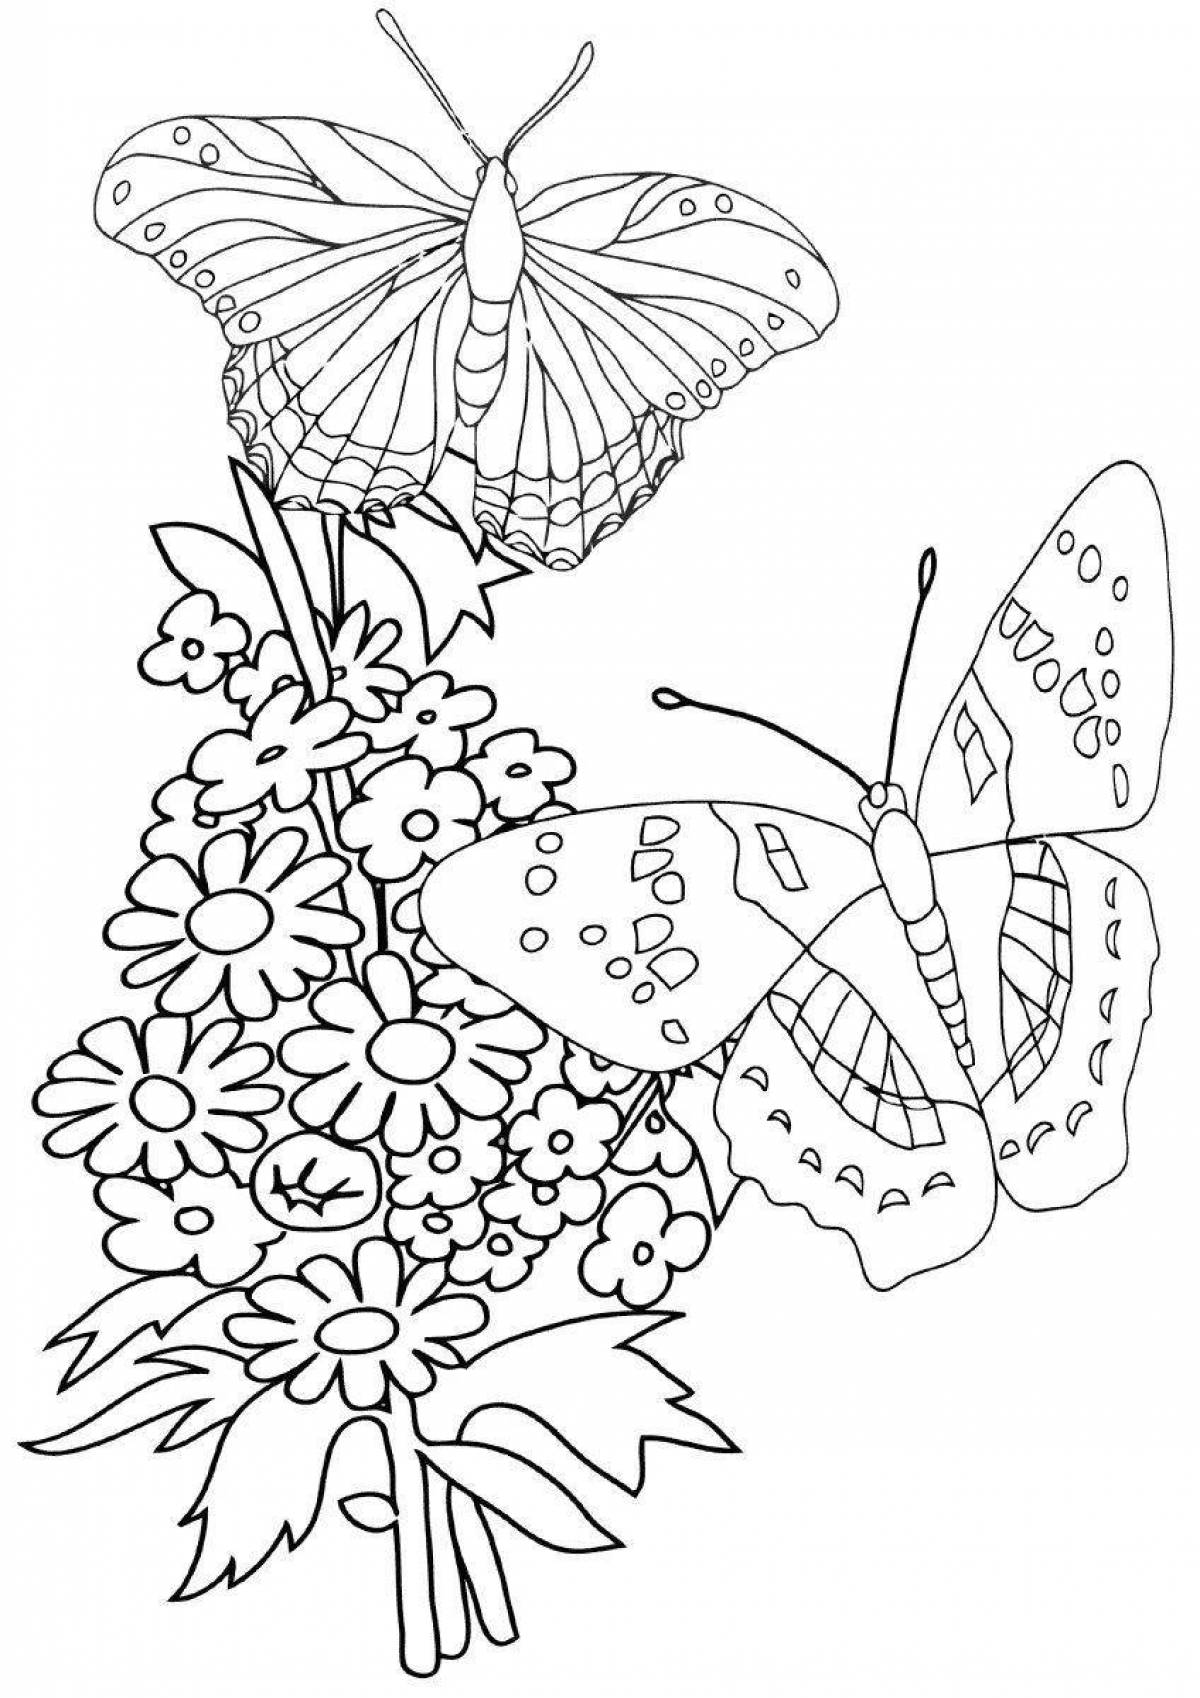 Refreshing forget-me-not coloring page